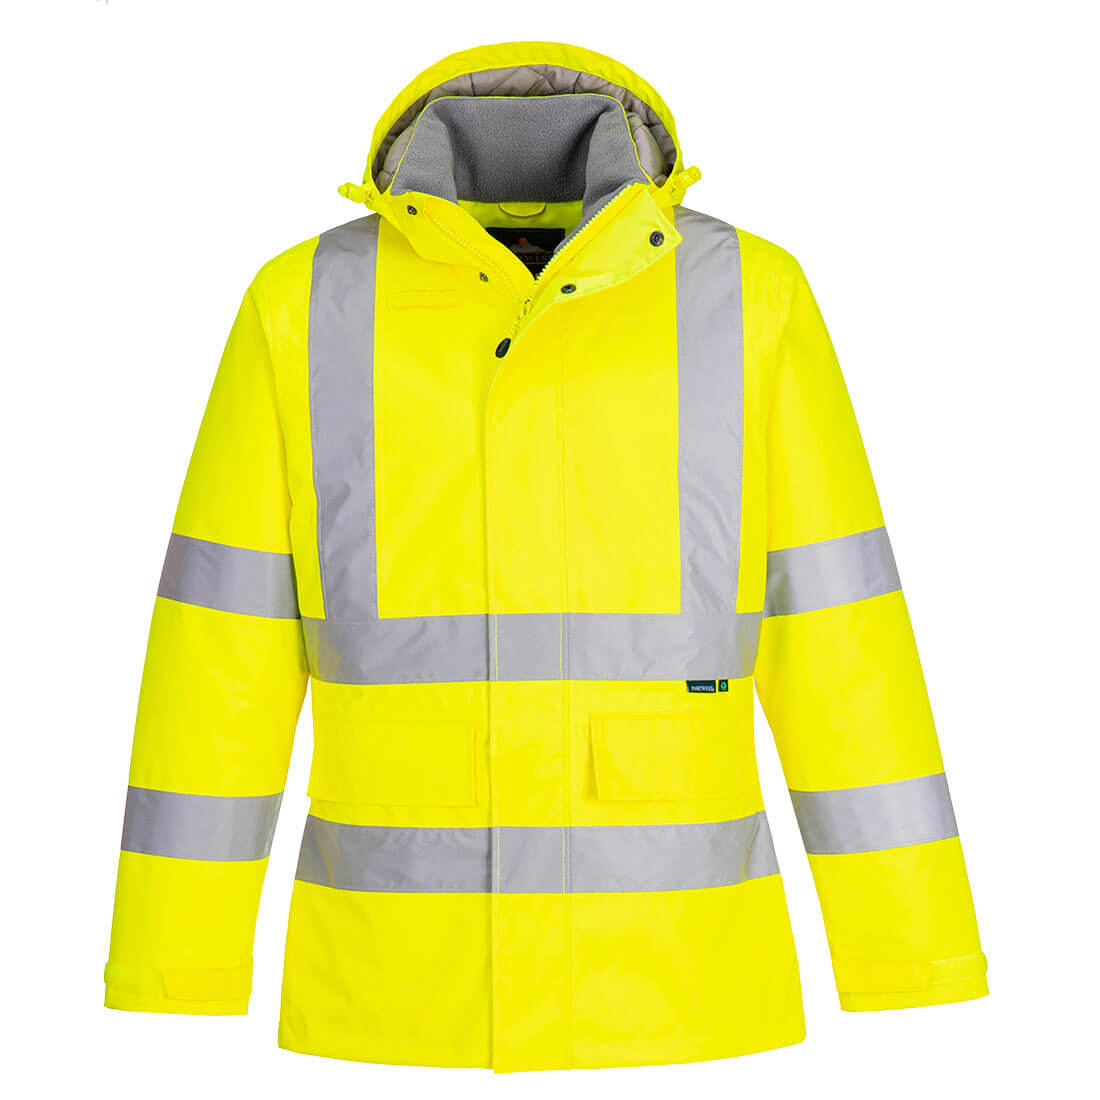 Portwest® Planet EC60 ECO Hi-Vis Winter Jackets are made with environmentally friendly recycled polyester and features reflective tape,  detachable lined hood, mic tabs, drawcord, internal pocket and water resistant fabric finish.